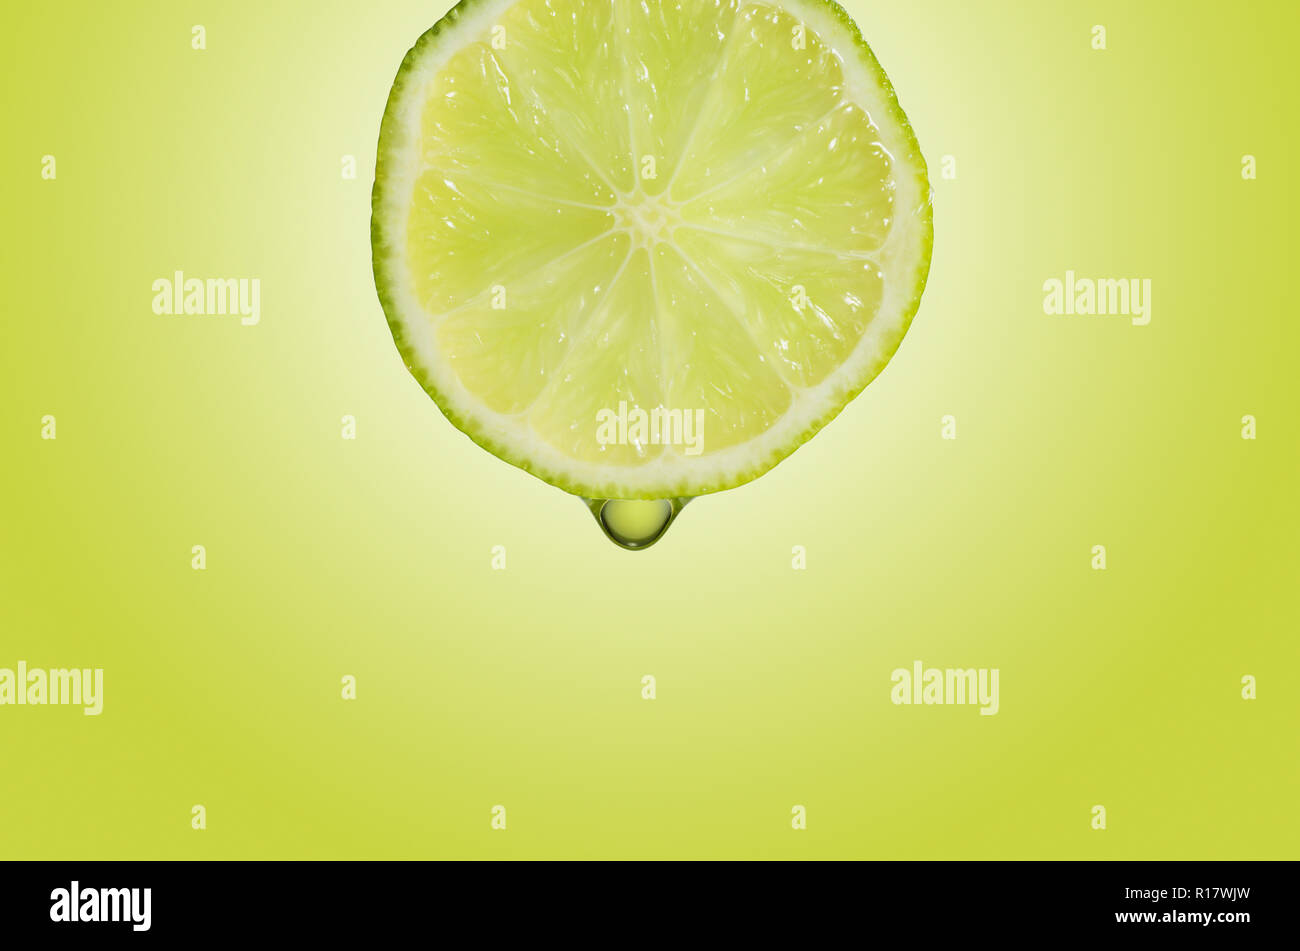 Close up view of slice of lime with droplet of juice, green background Stock Photo